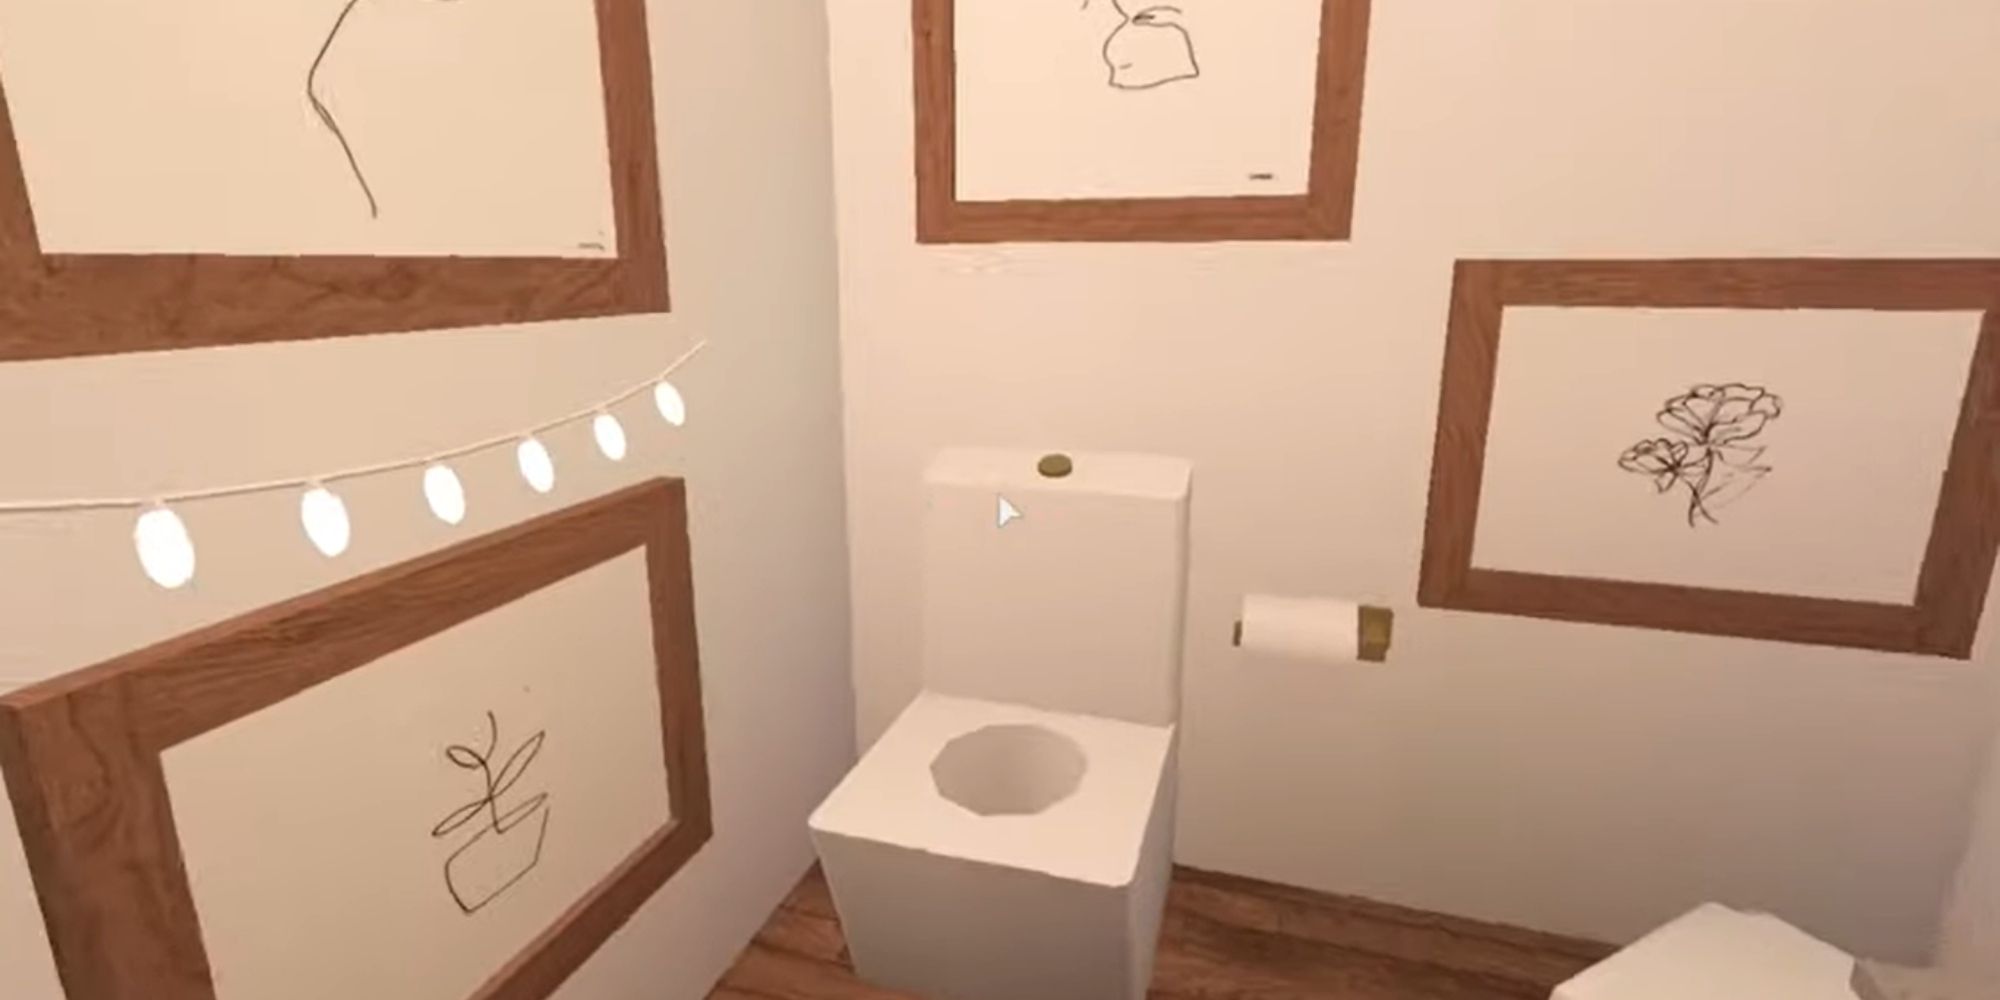 a small roblox toilet